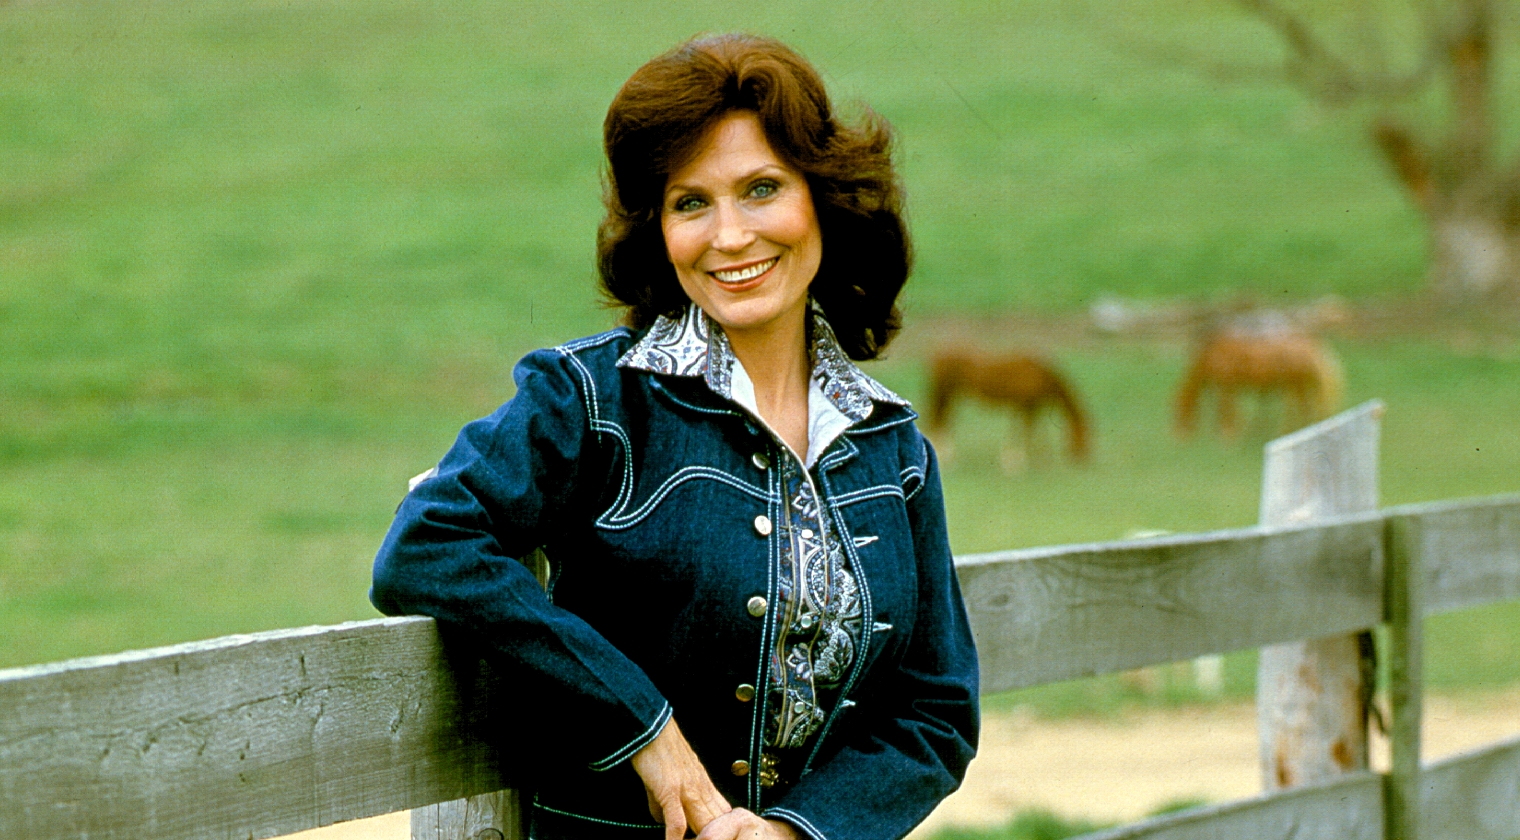 Loretta Lynn's Net Worth, Salary, Early Life, Personal Life, and More!